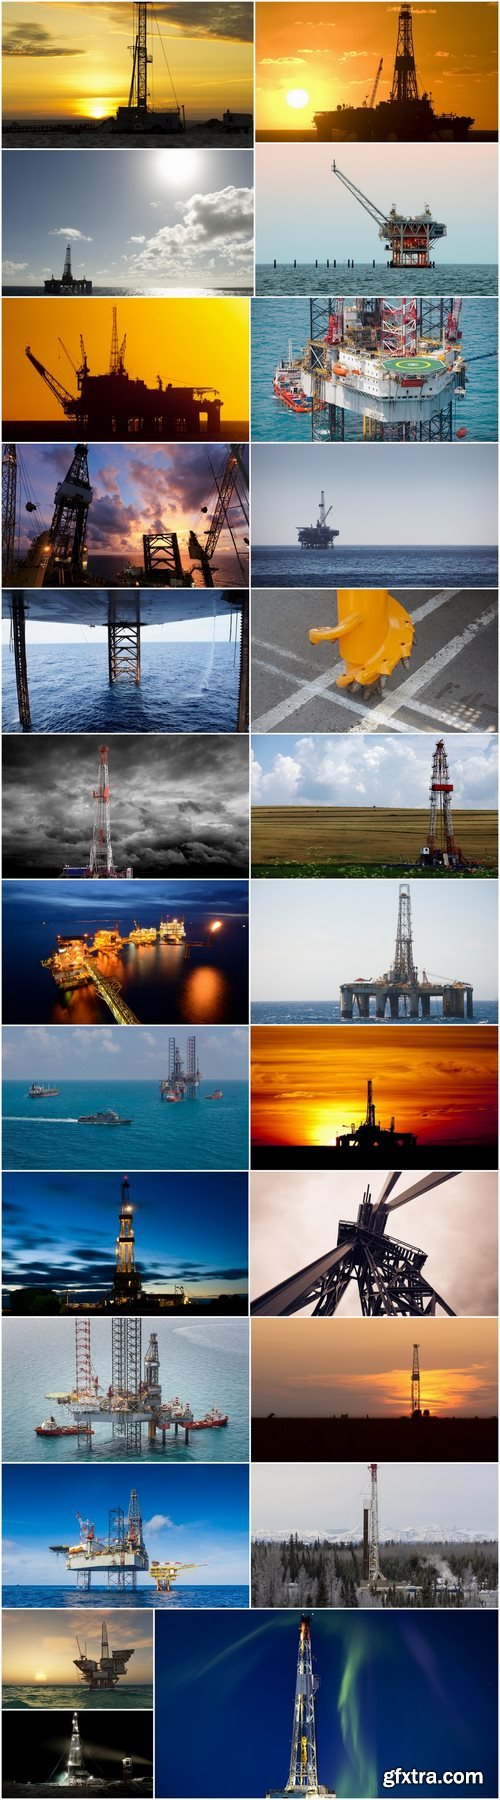 Oil drilling platform extraction of mineral resources gas oil 25 HQ Jpeg